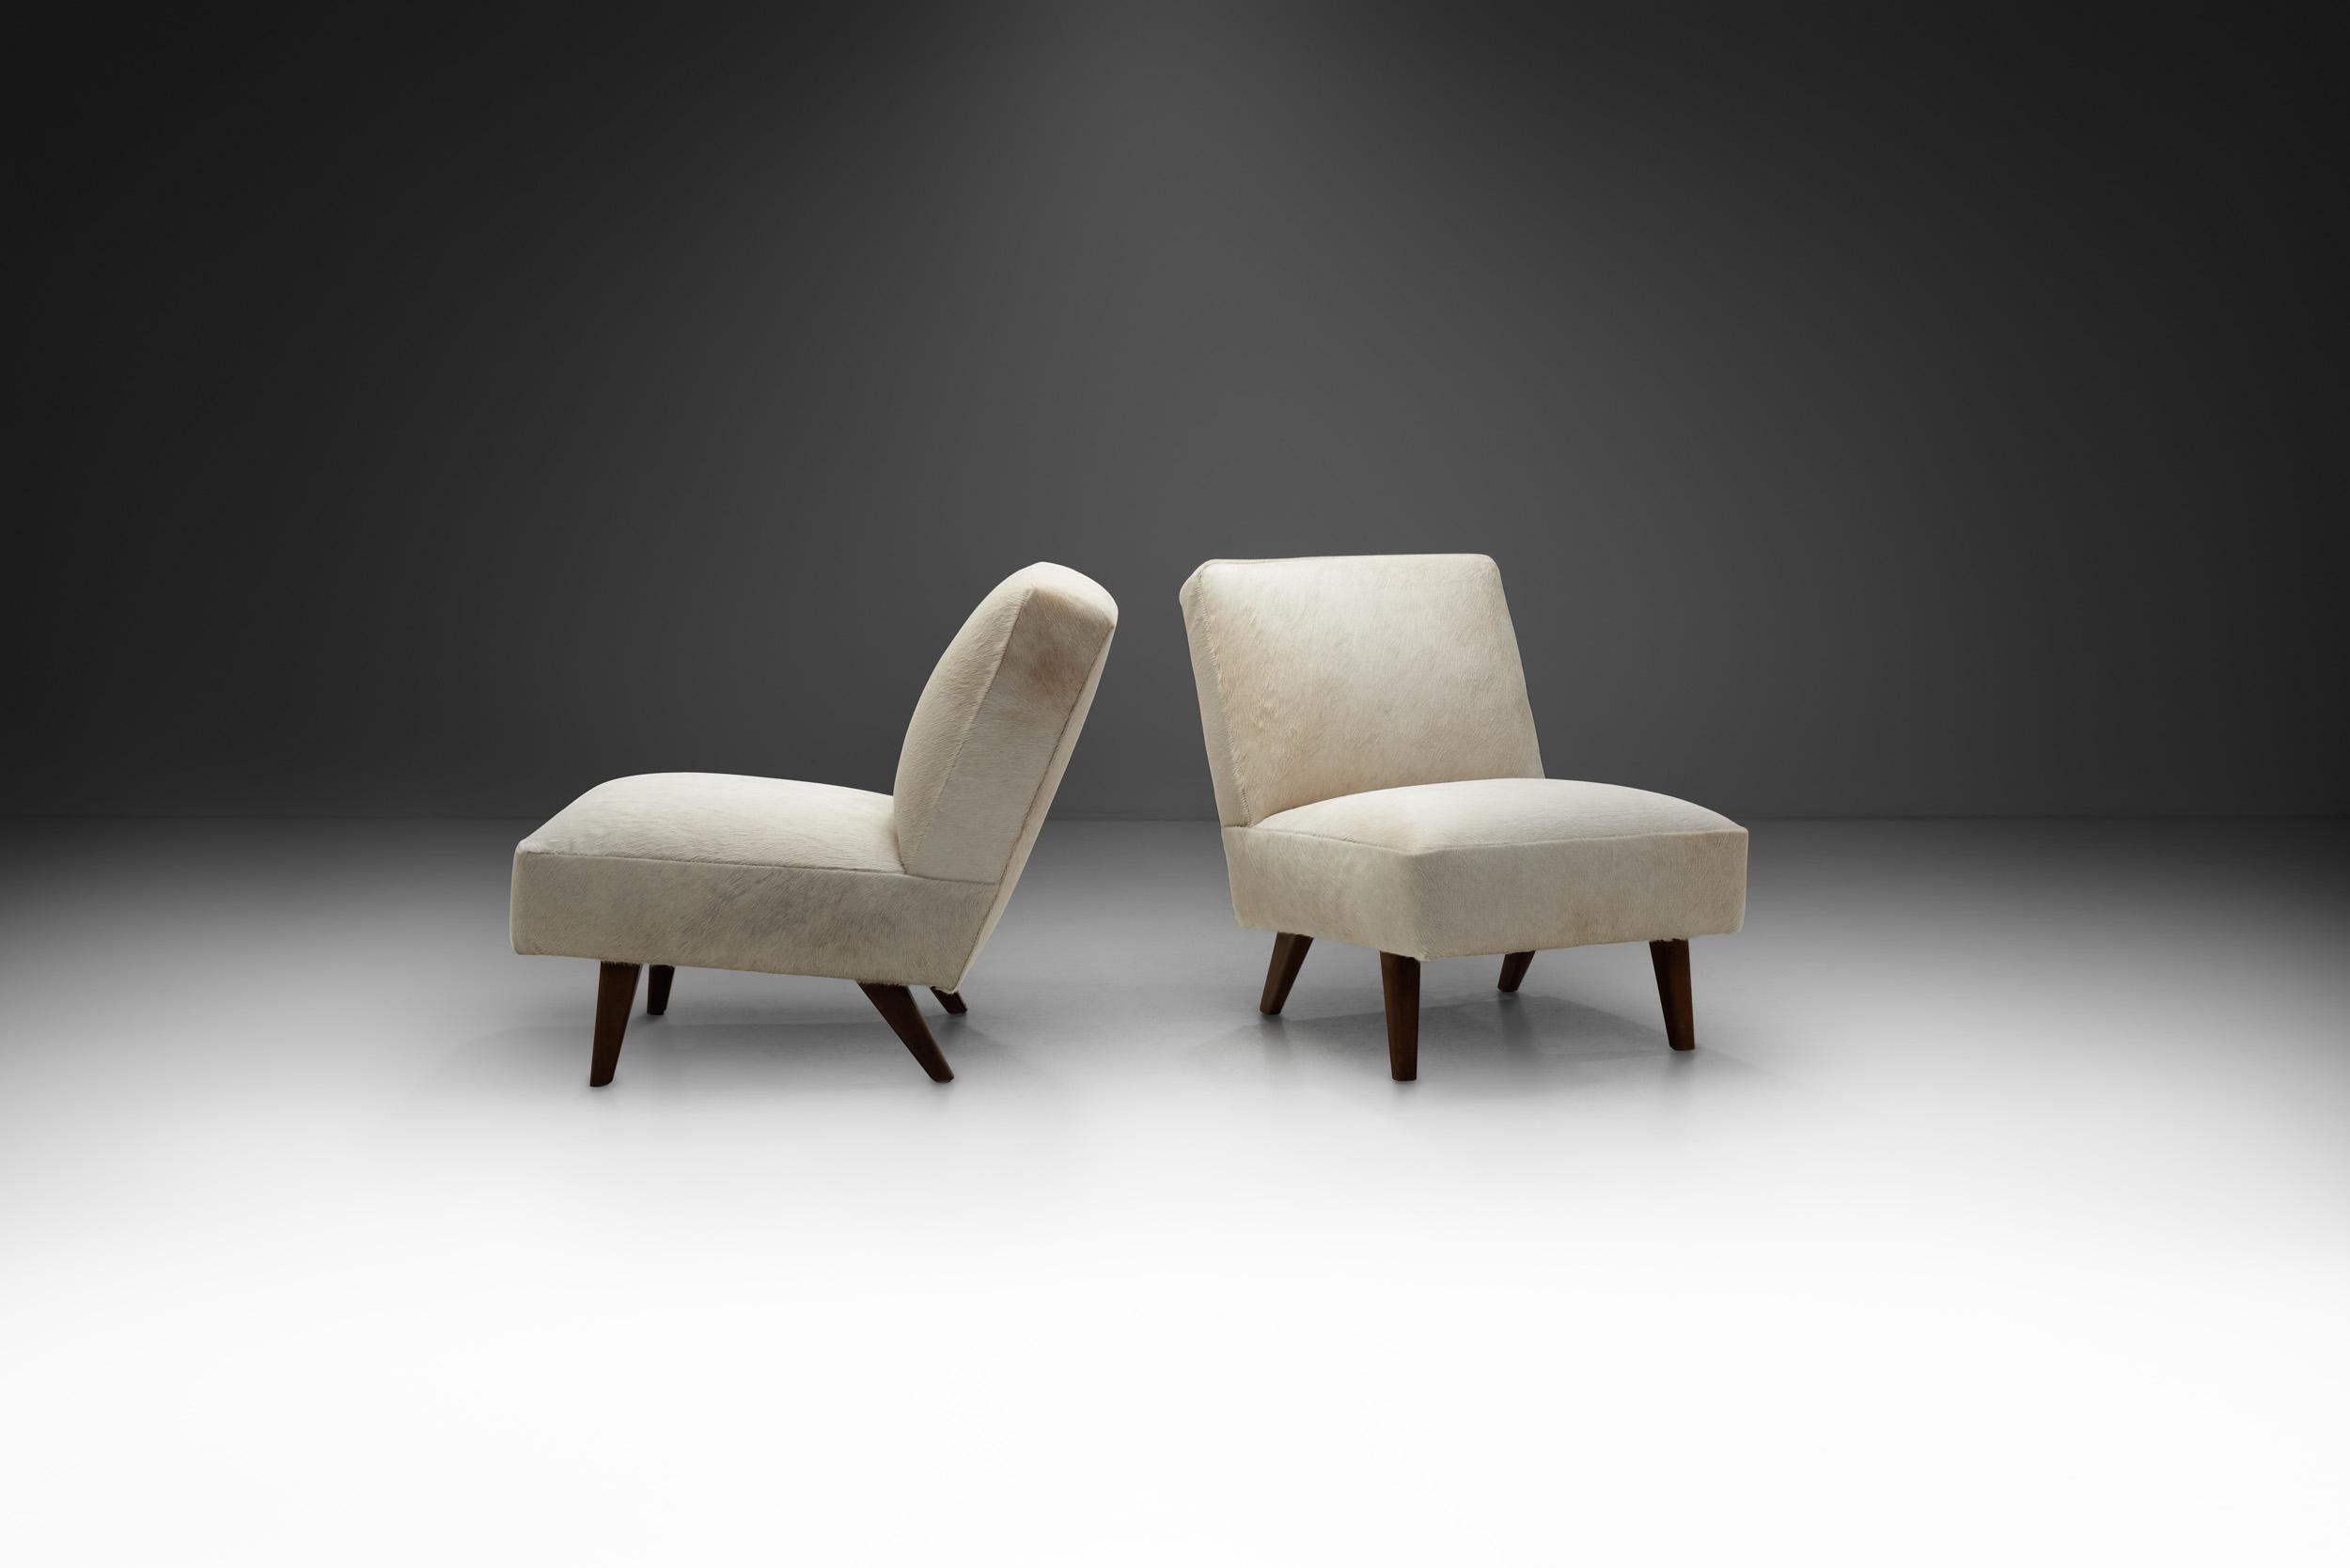 This elegant pair of lounge chairs is an interesting bridge between the 20th century’s earlier artistic movements, like Art Deco, and the modernist movement that was about to shape much of Europe’s furniture design for the following